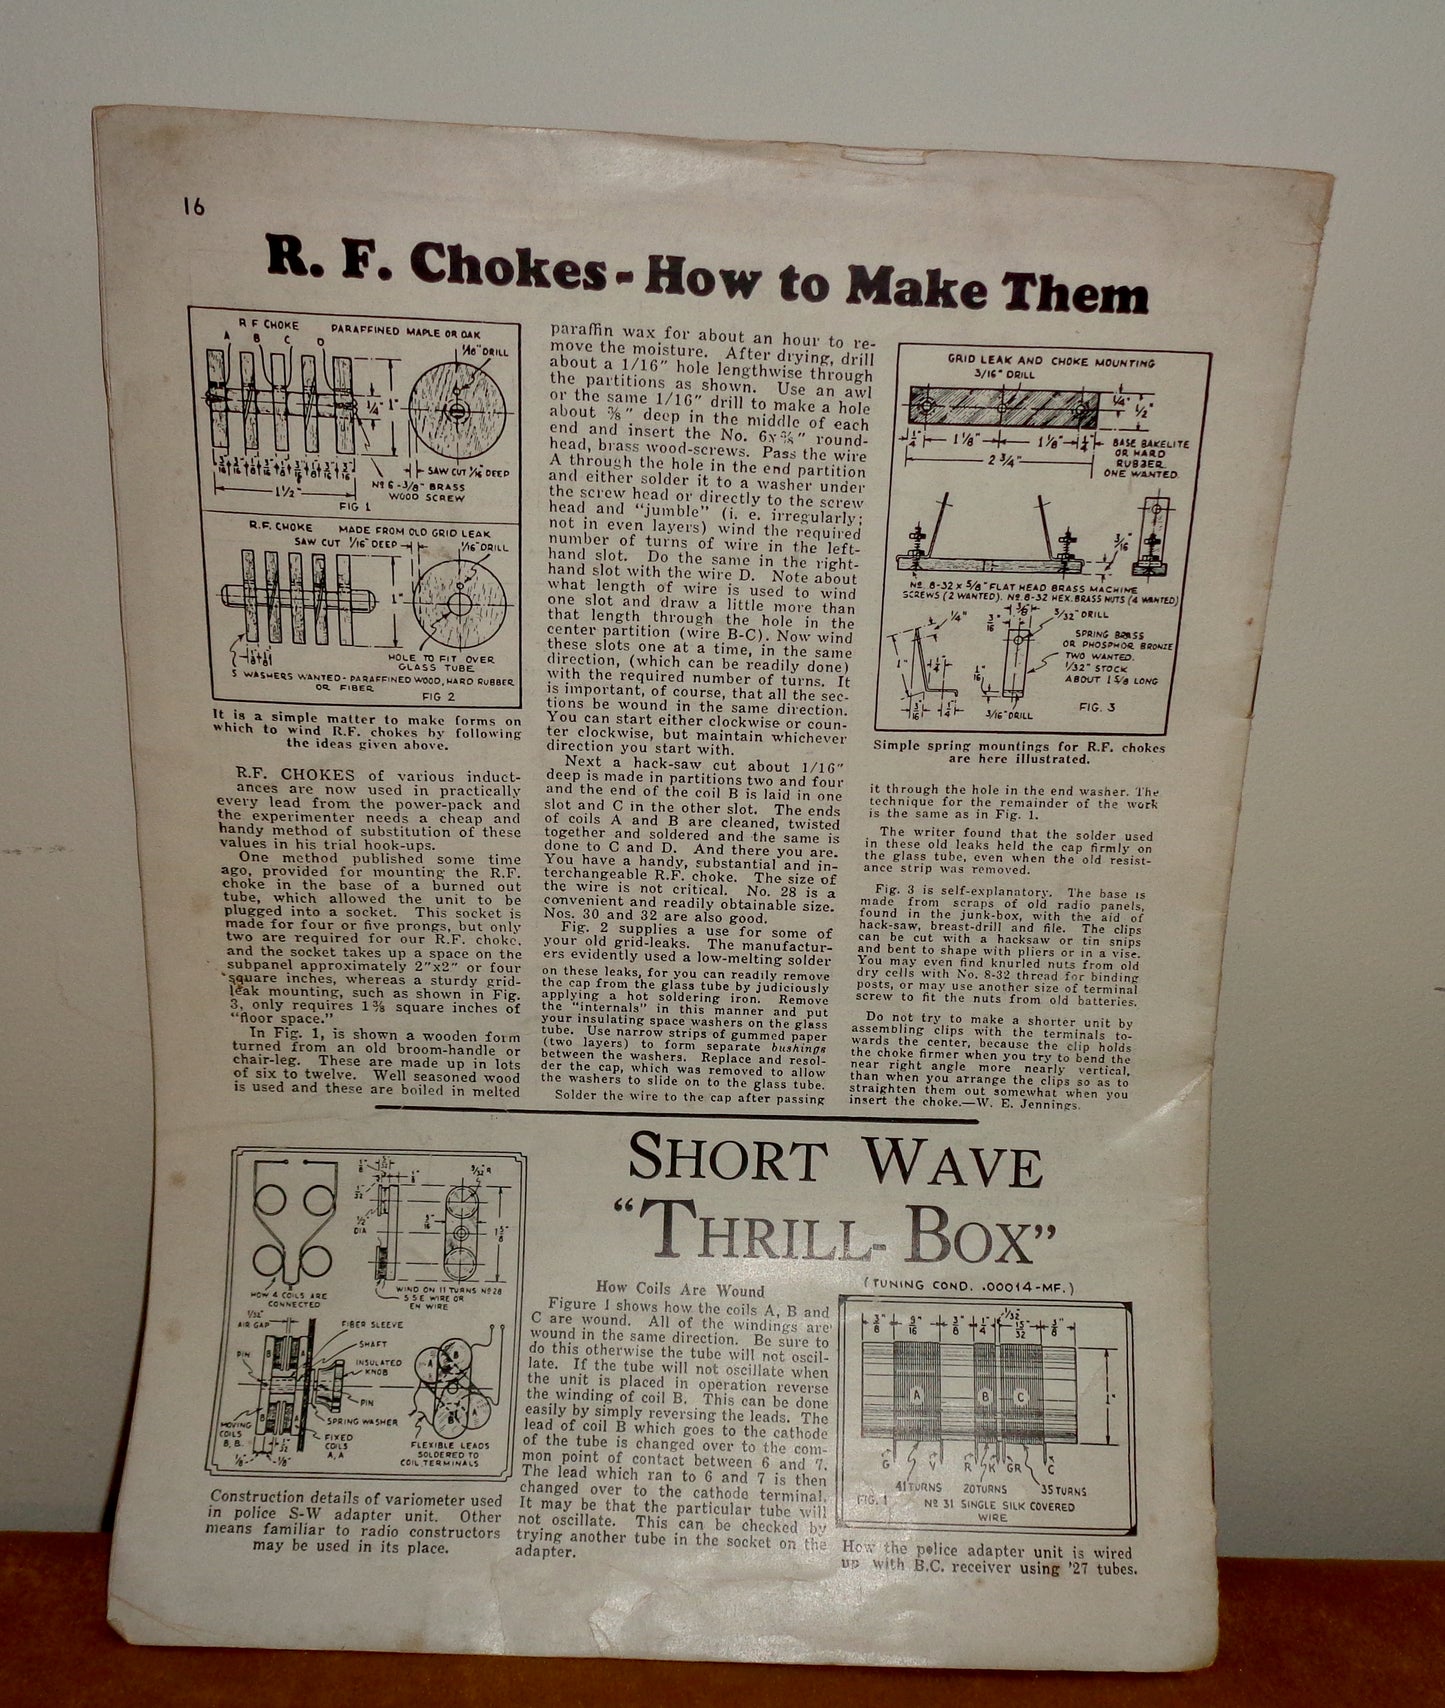 1937 Short Wave Coil Book Catalogue By Radio Publications